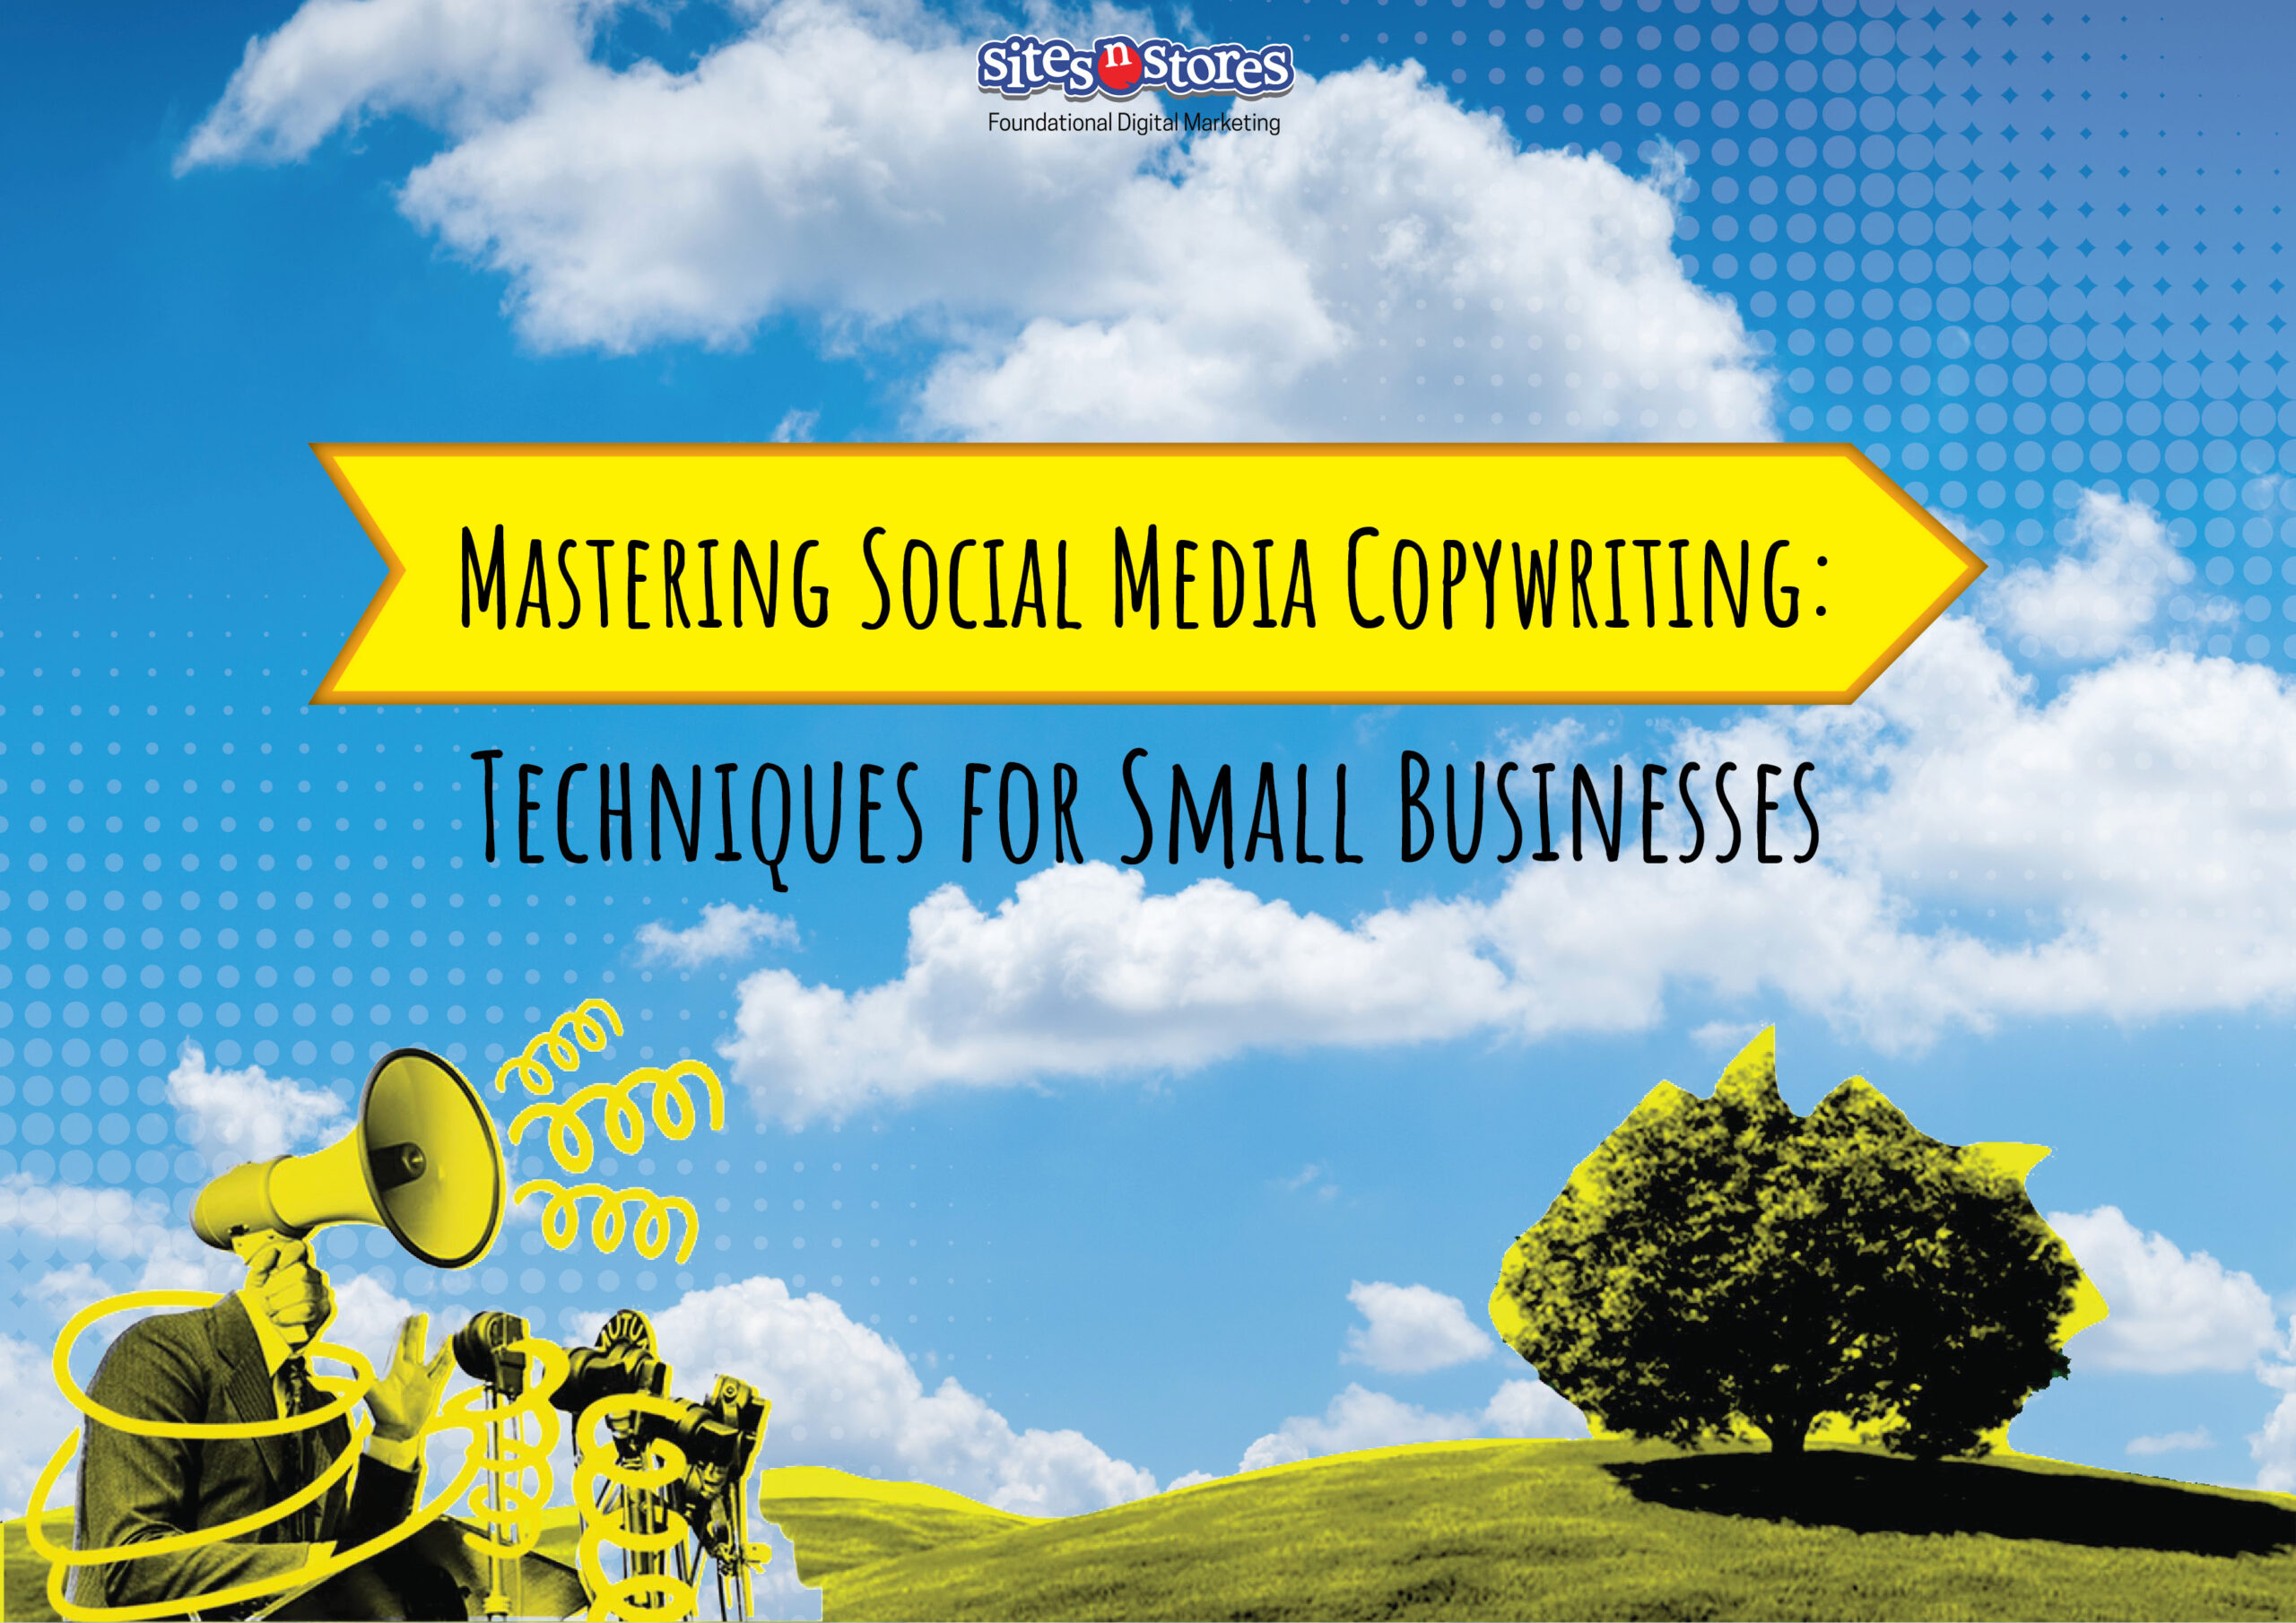 Mastering Social Media Copywriting: Techniques for Small Businesses